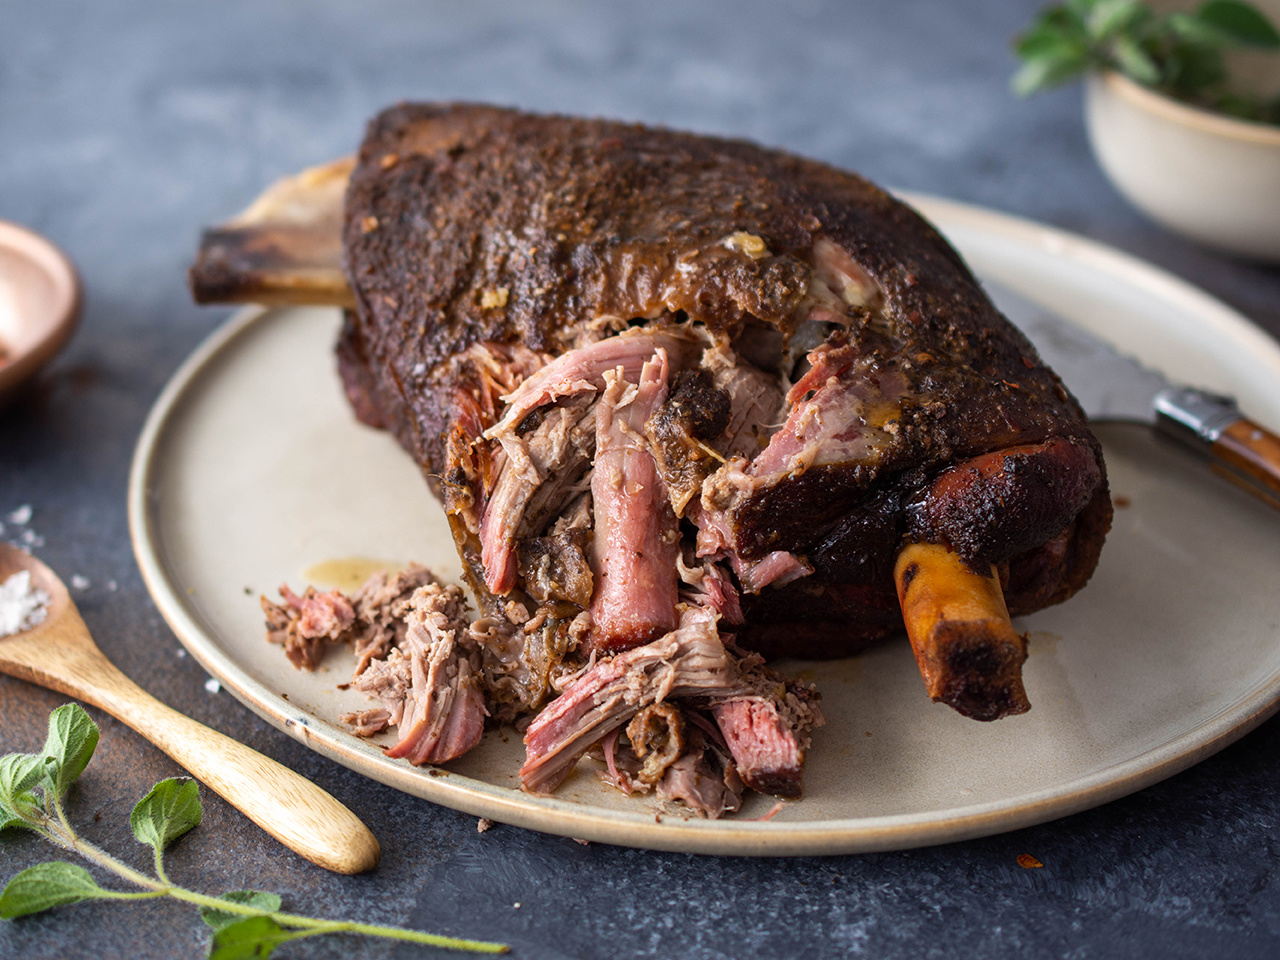  Slow Cooked Clare Valley Lamb Shoulder

